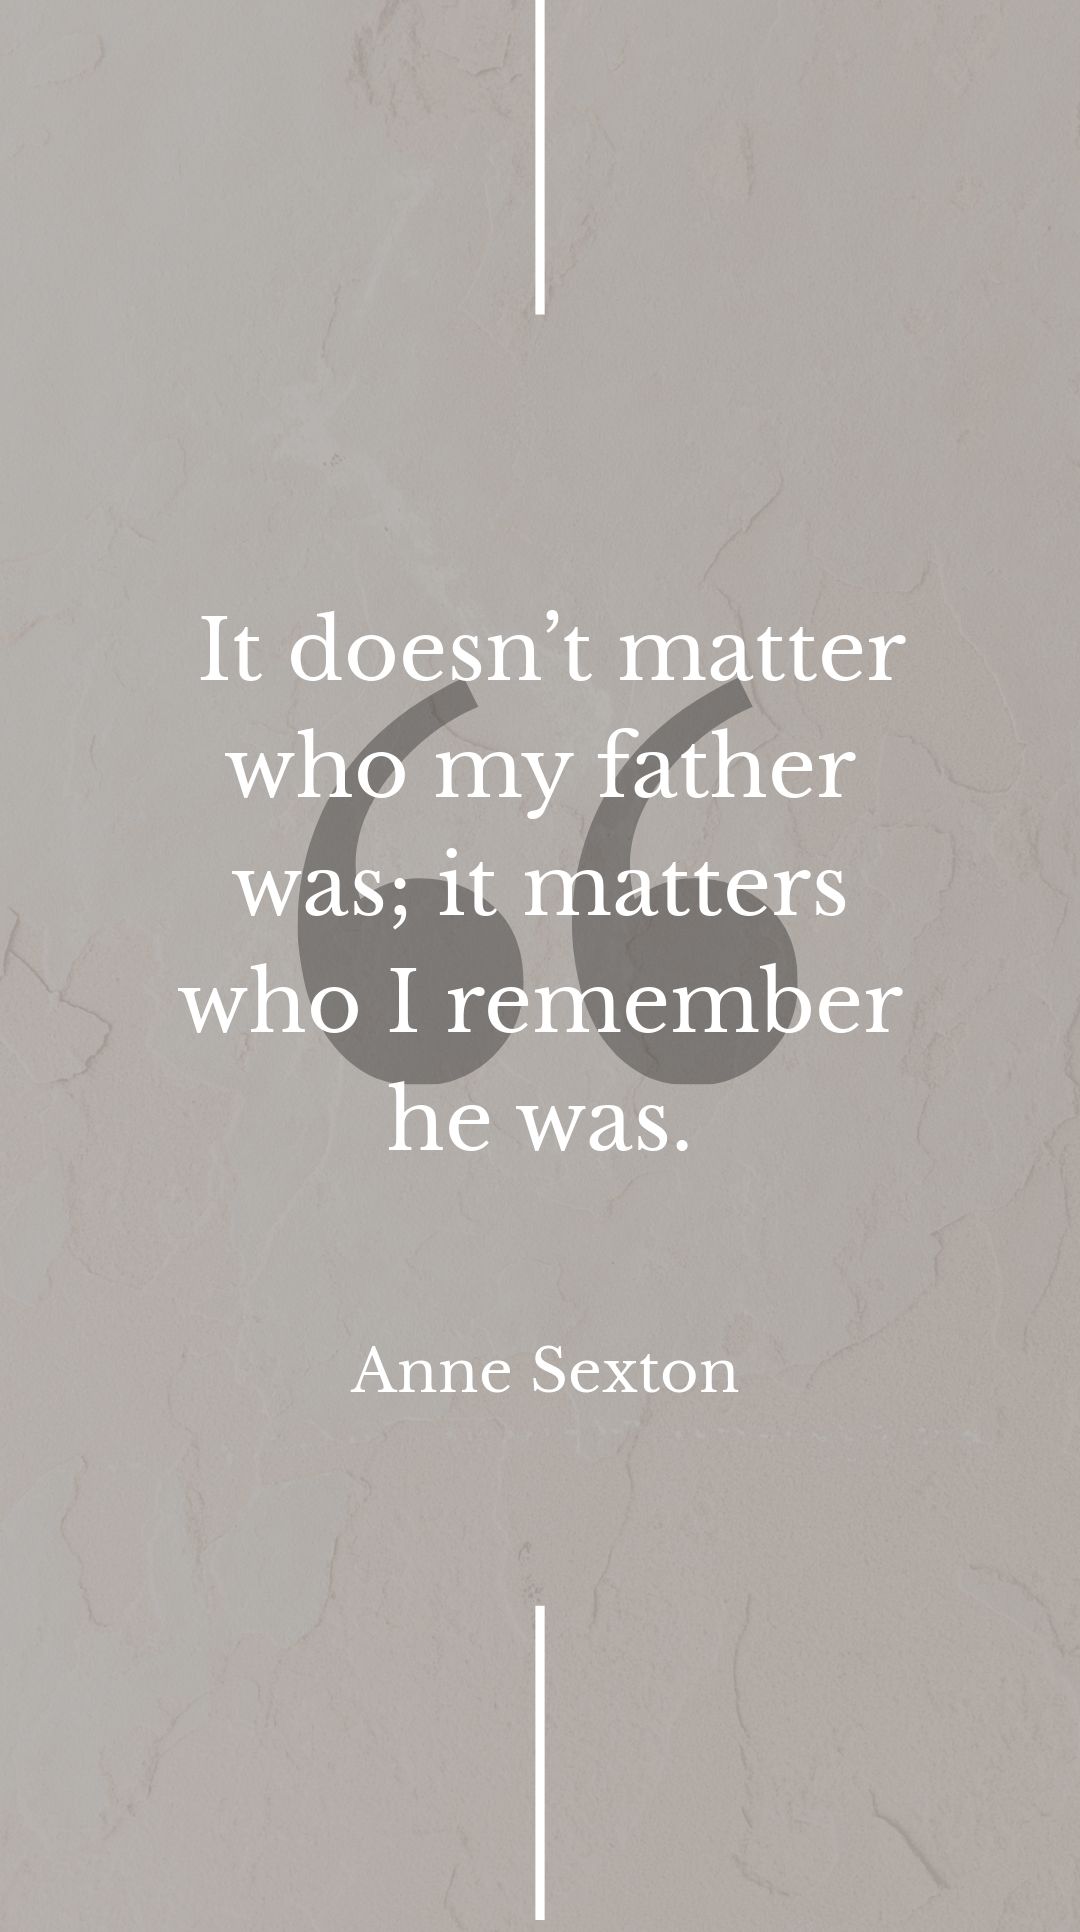 Anne Sexton - It doesn’t matter who my father was; it matters who I remember he was.